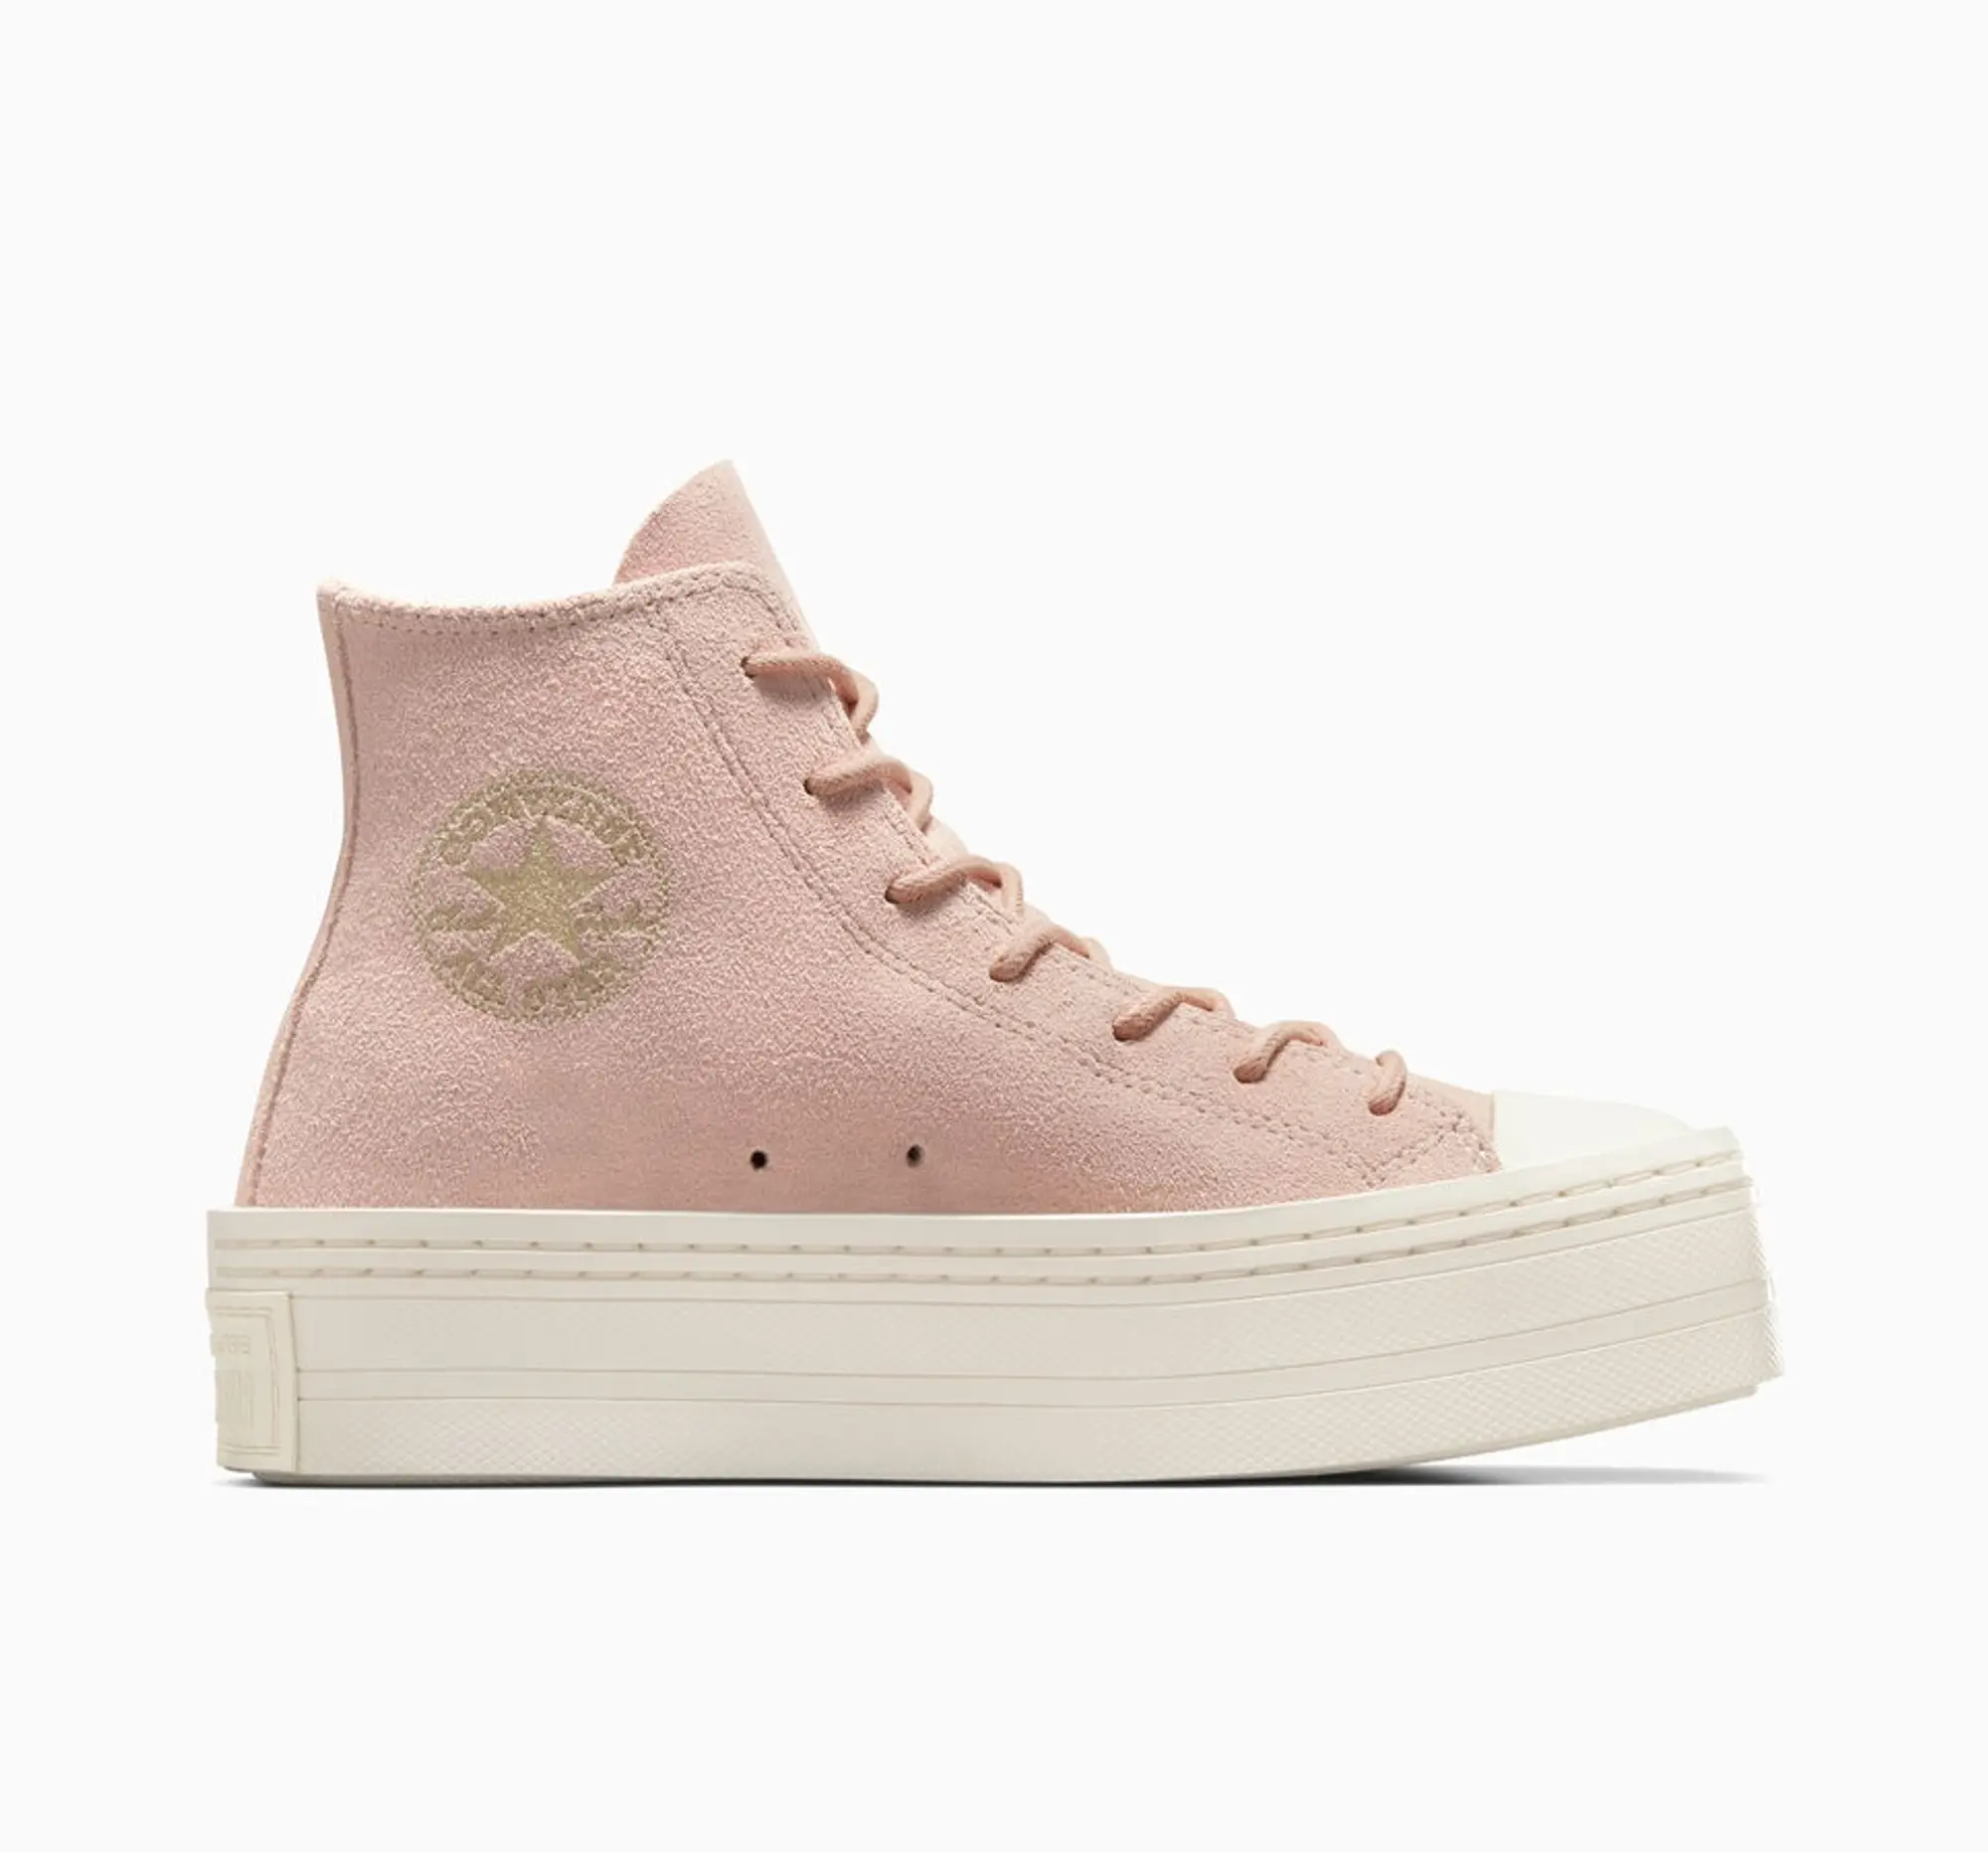 Converse all star modern lift trainers in pale pink